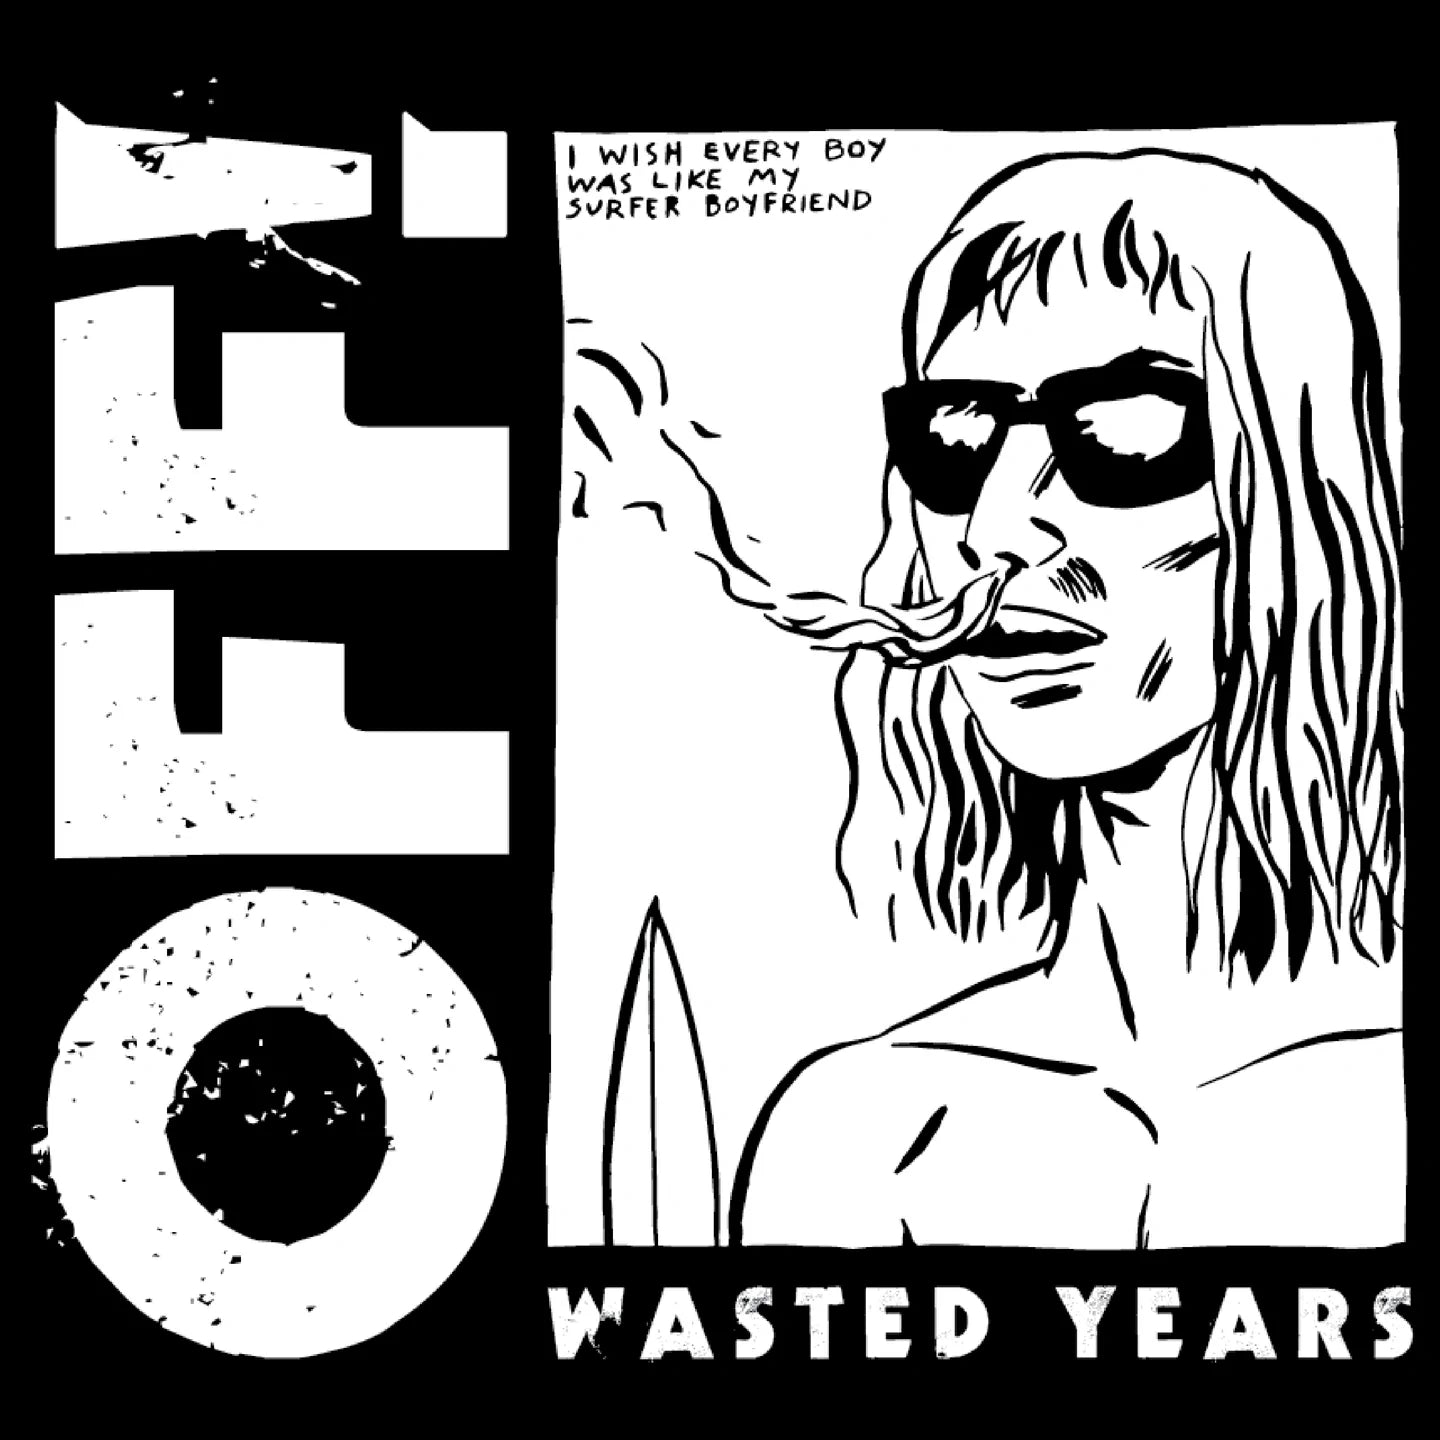 OFF! - WASTED YEARS Vinyl LP